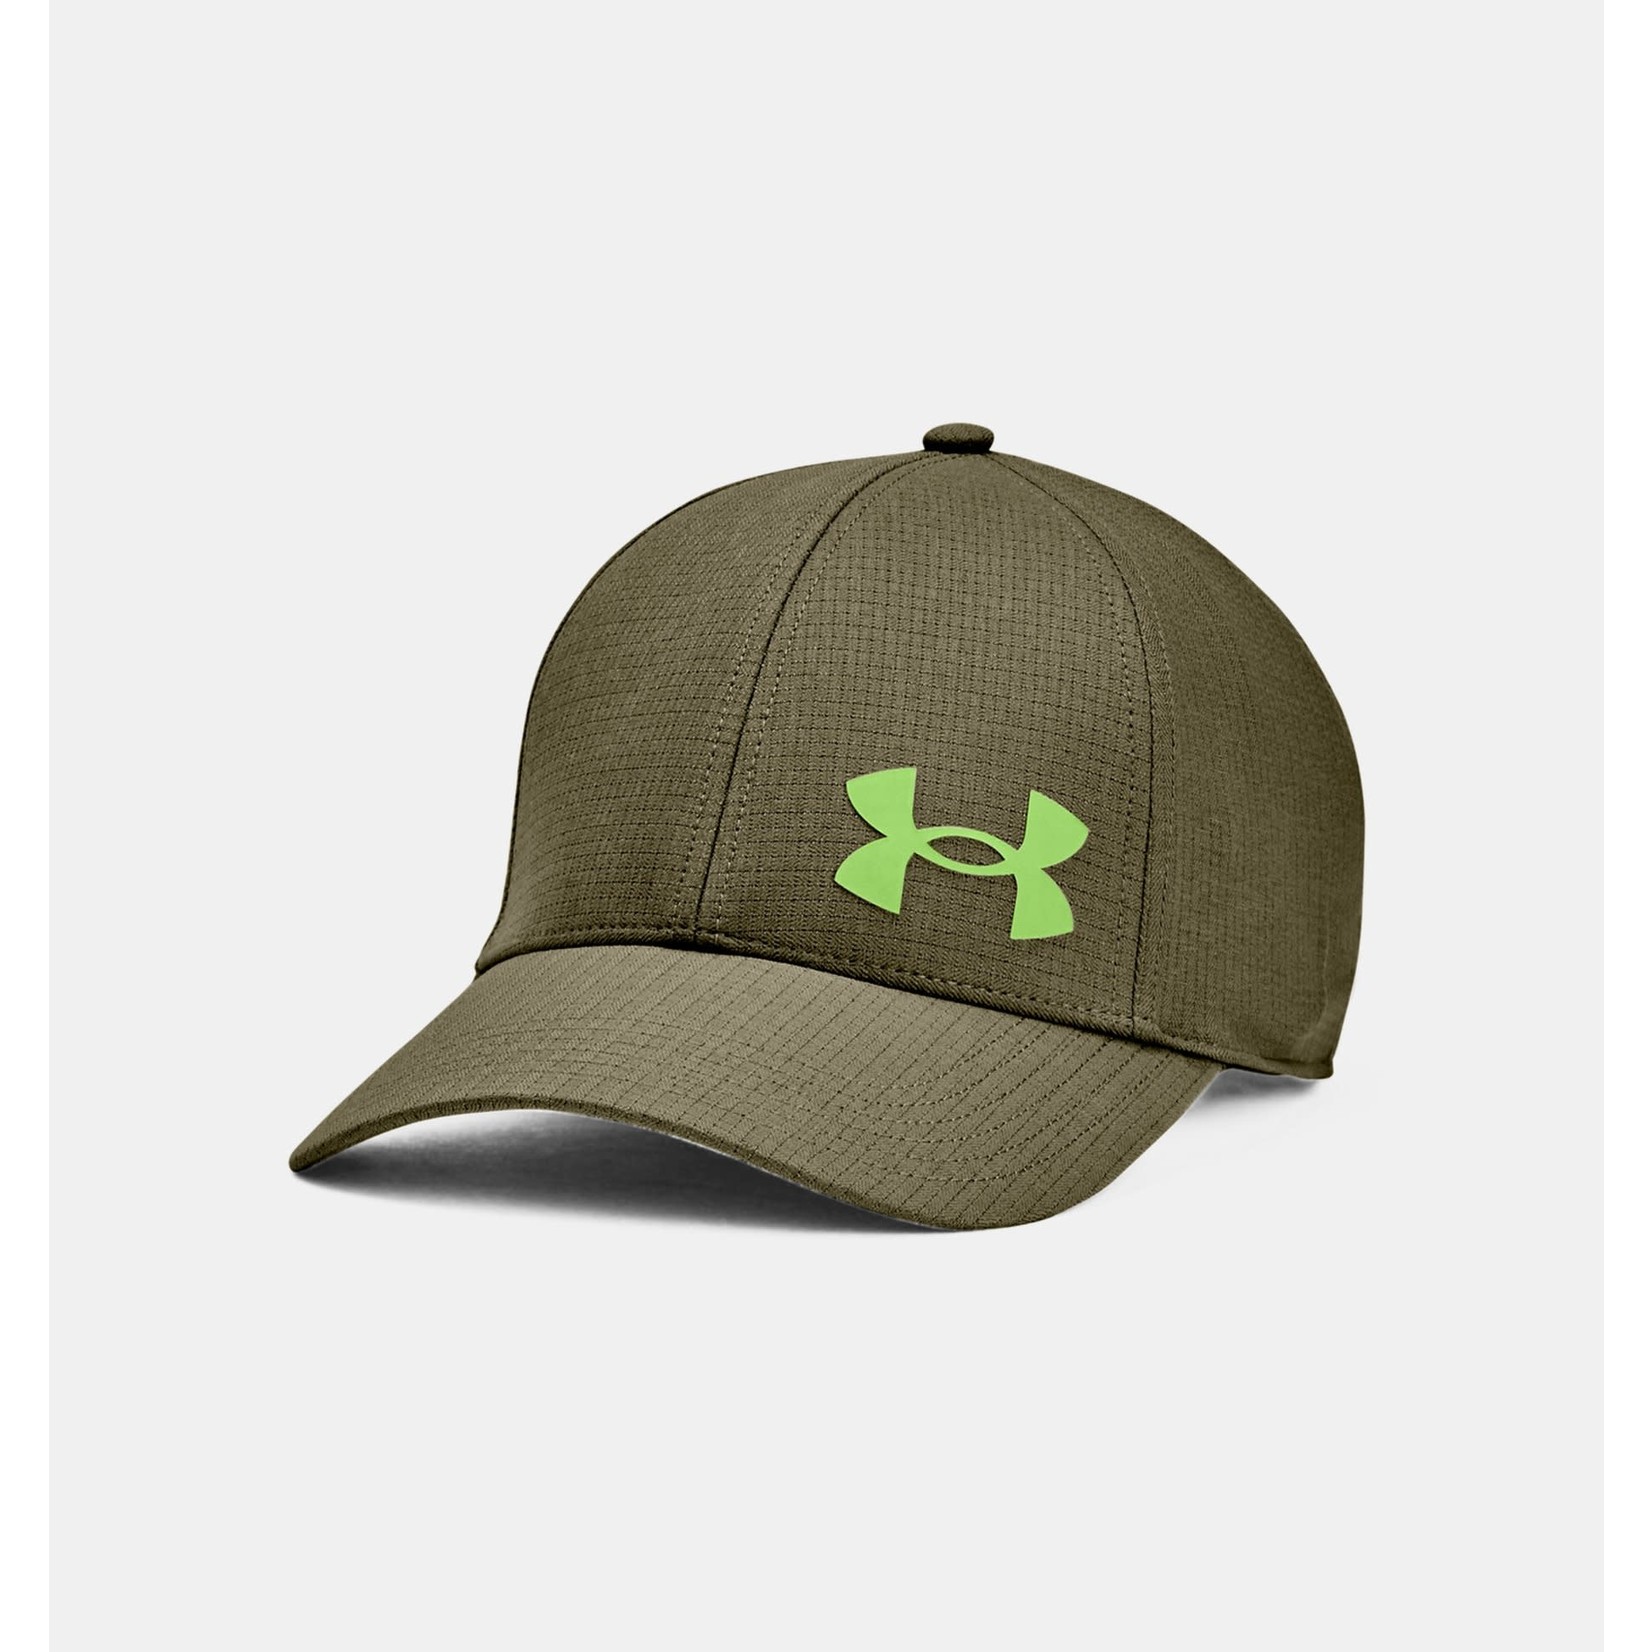 Under Armour Isochill Armourvent Hat